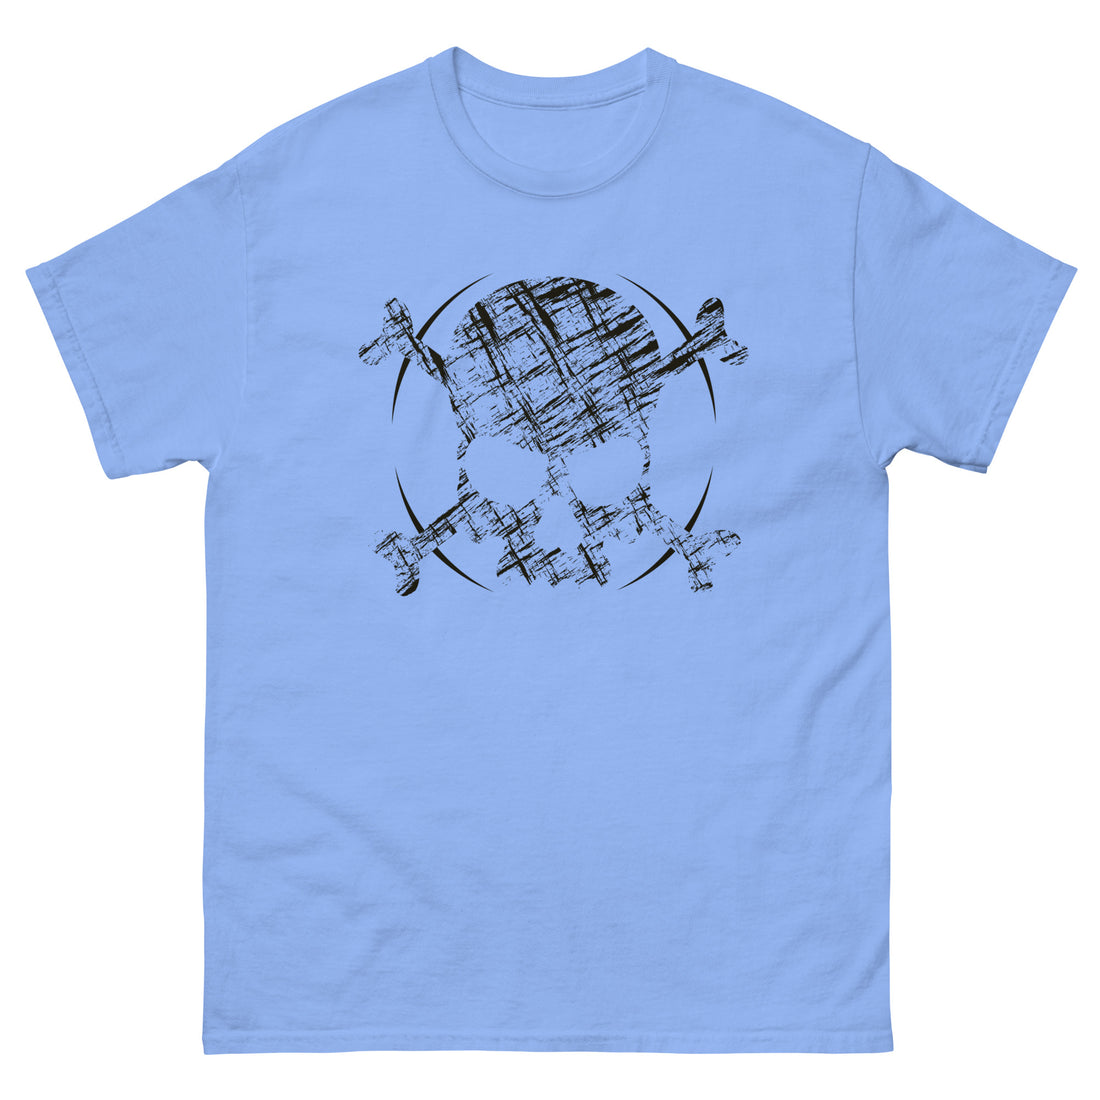 A carolina blue t-shirt adorned with a roughly cross-hatched skull and crossbones in black.  Solid black arcs give the image the impression of movement towards the end of the crossbones.